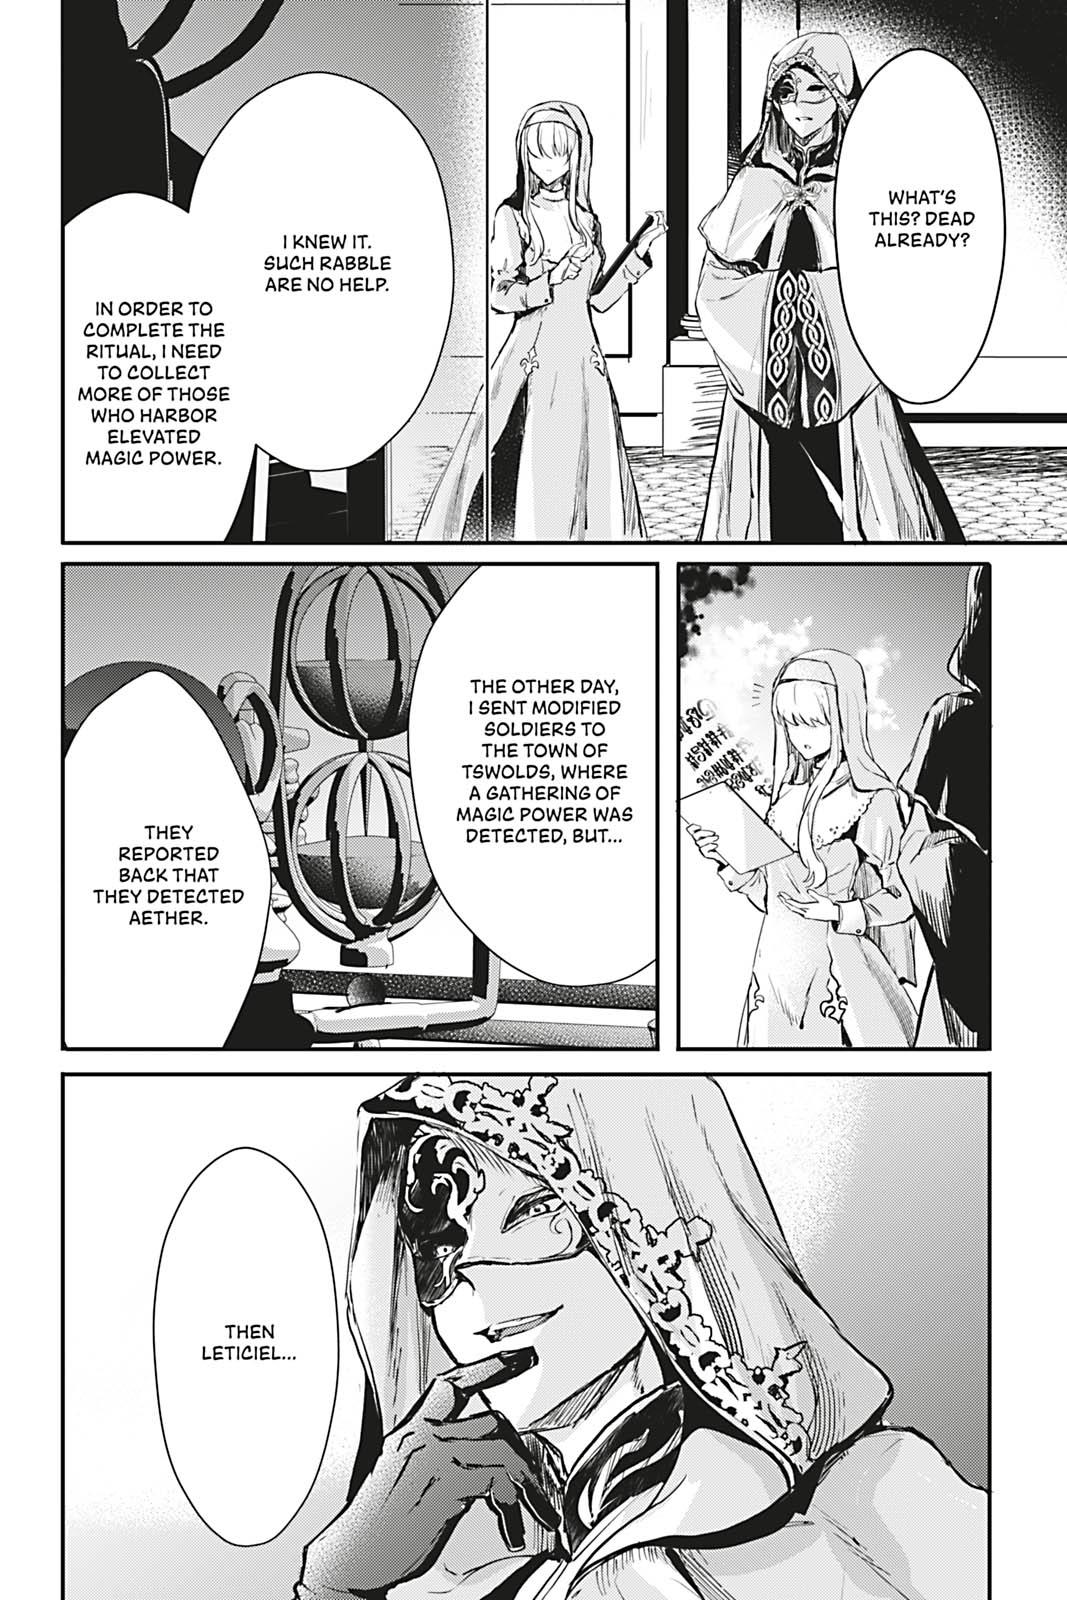 Her Royal Highness Seems To Be Angry - Page 2